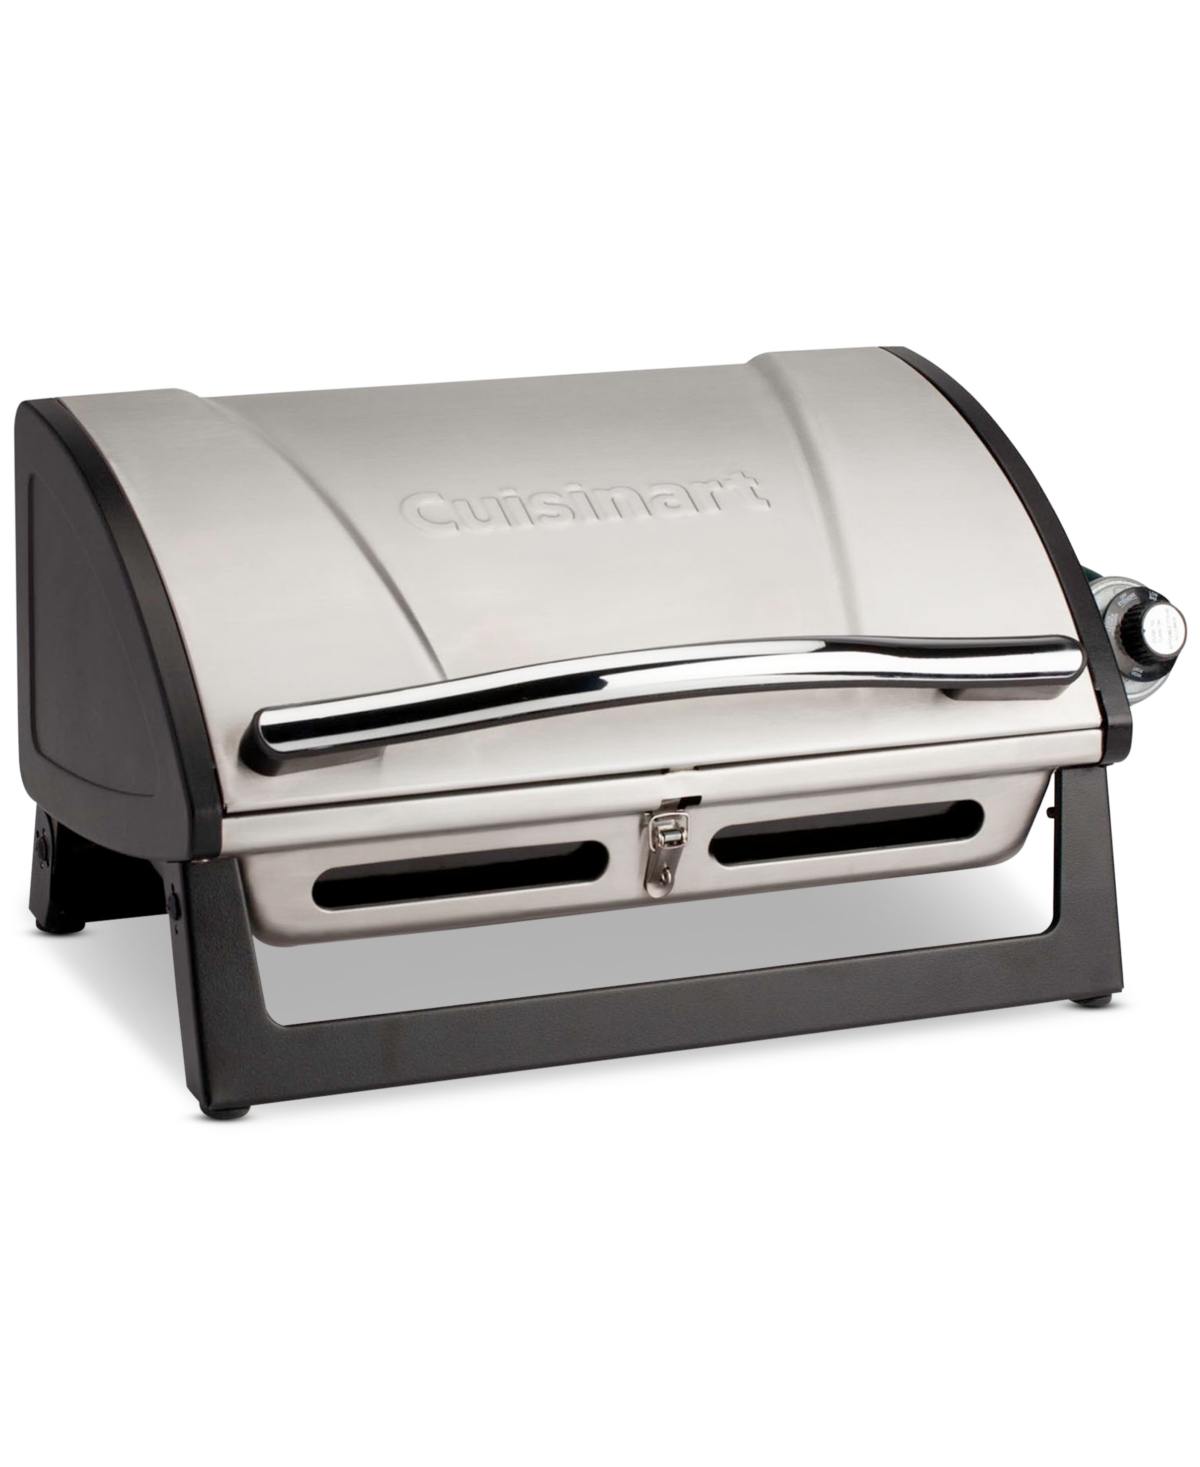 Cuisinart Grillster Portable Gas Grill In No Color